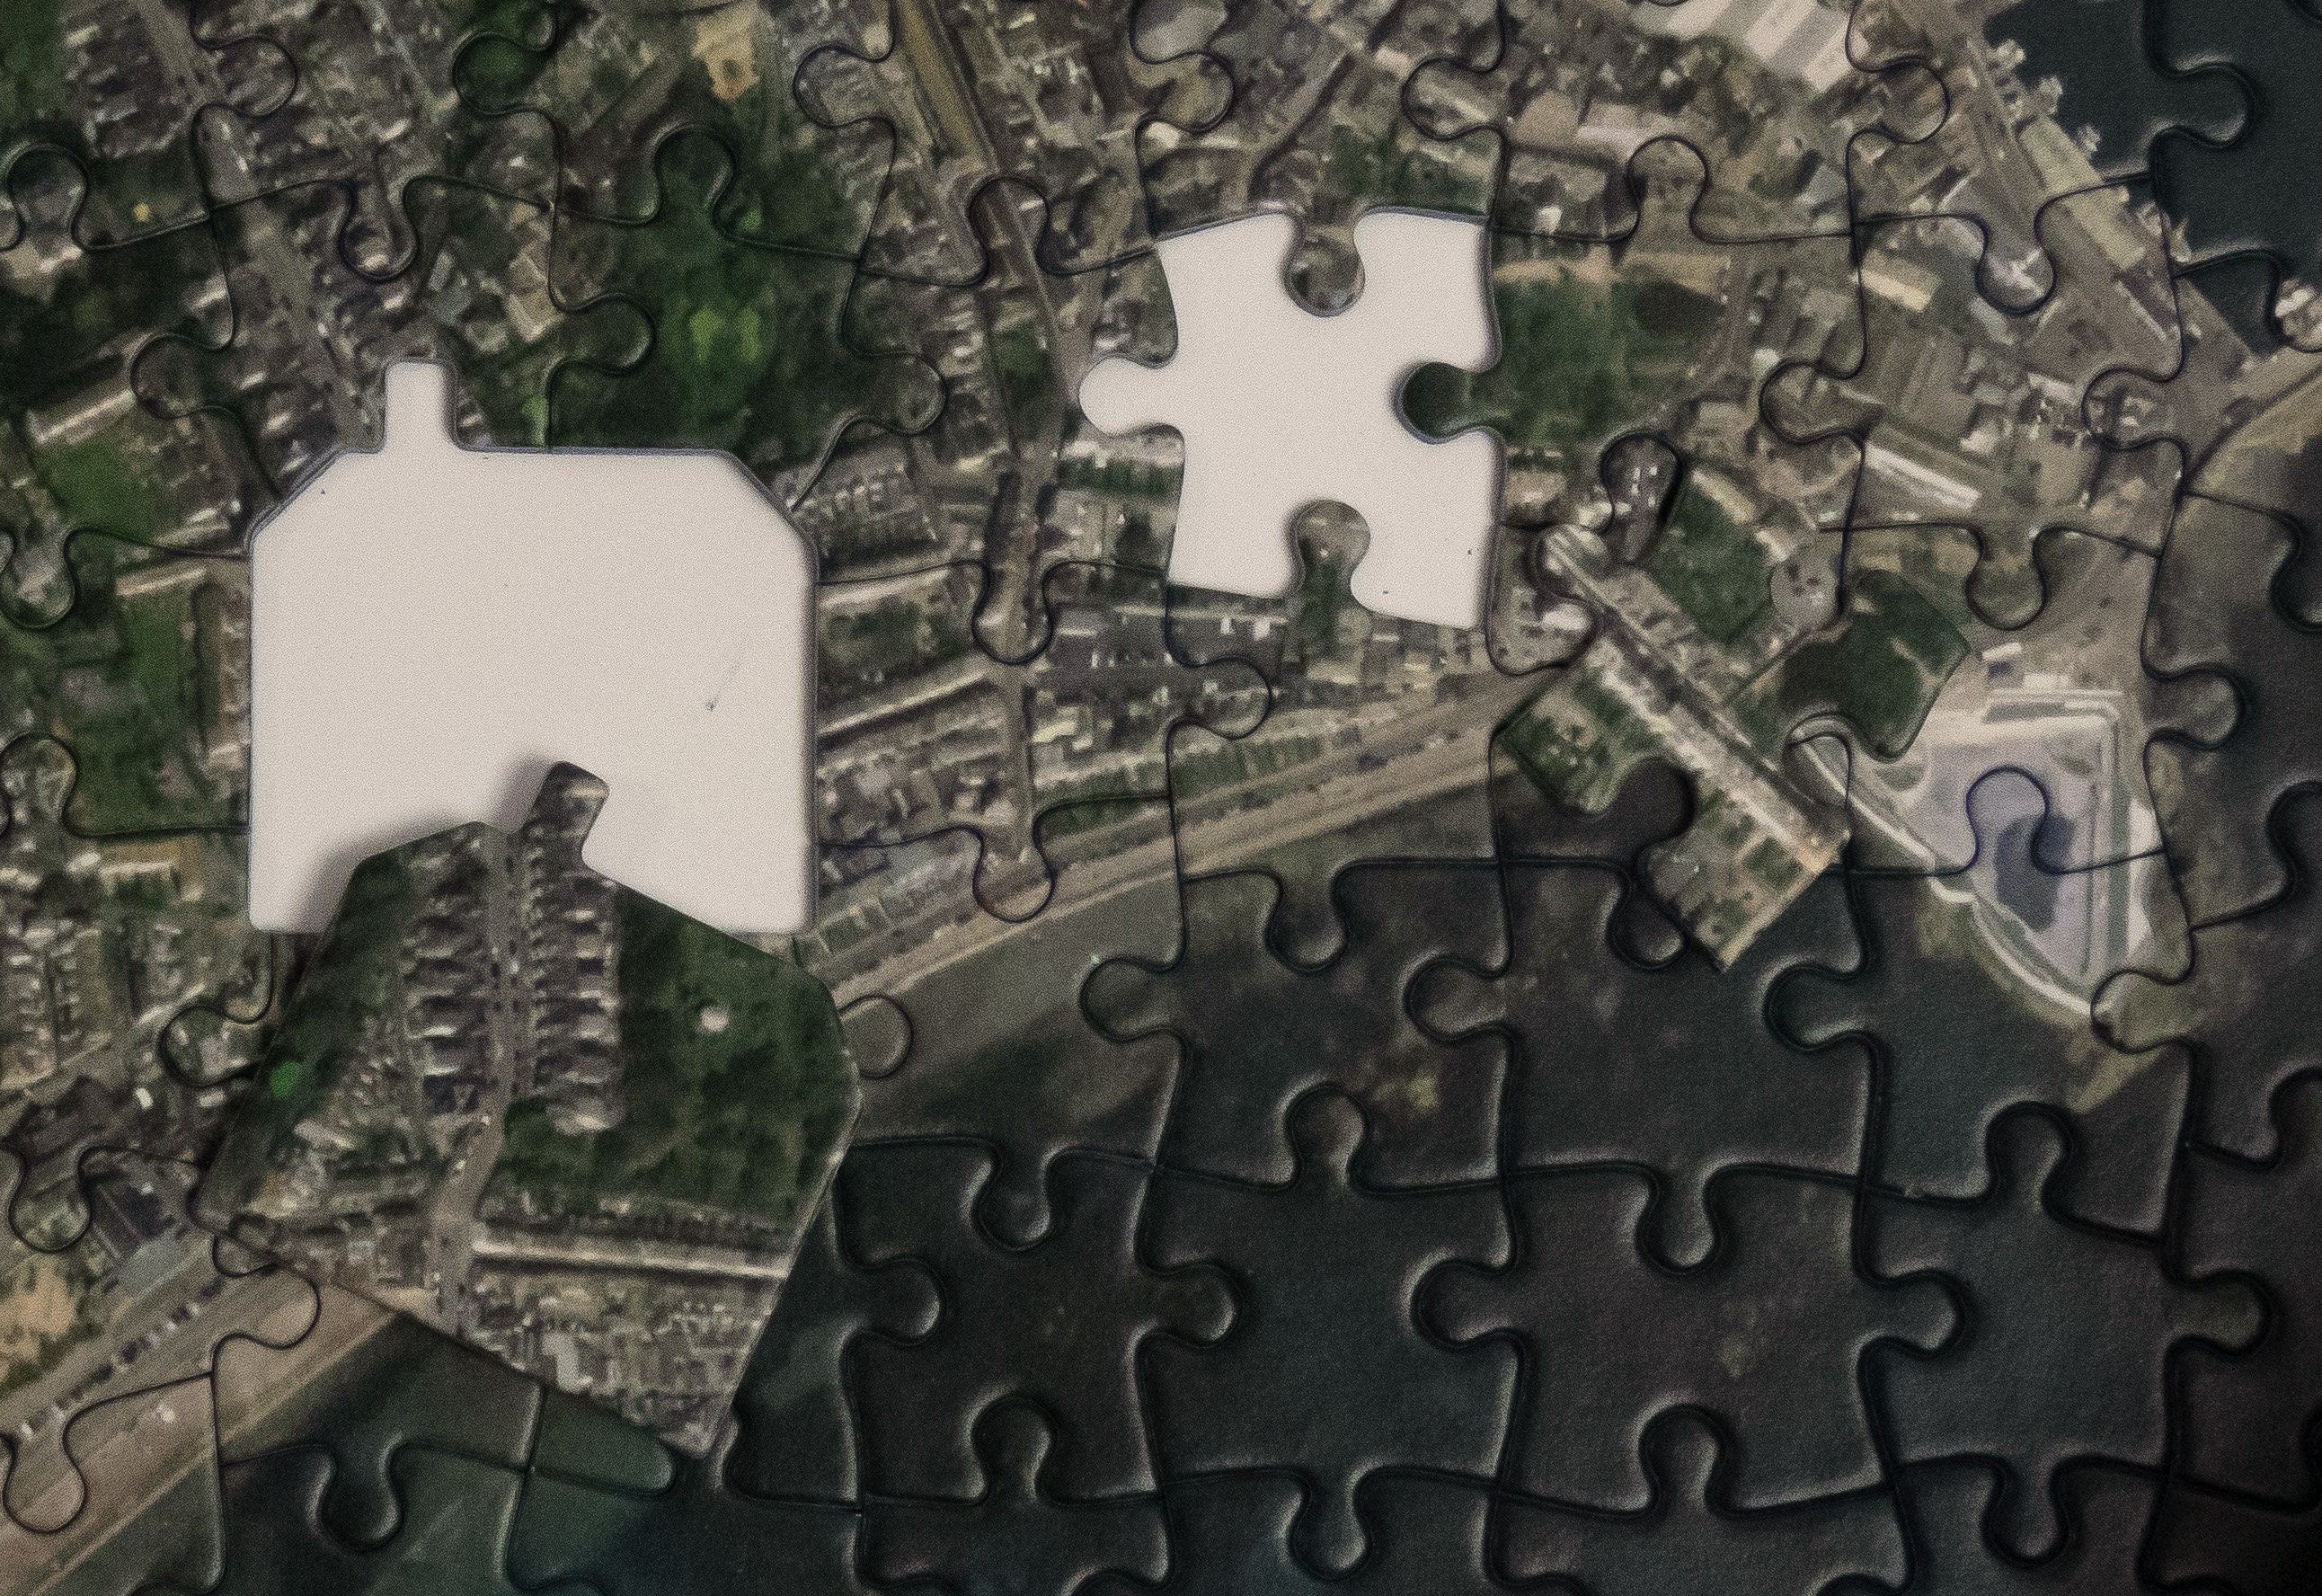 arras.io + died out of map - ePuzzle photo puzzle